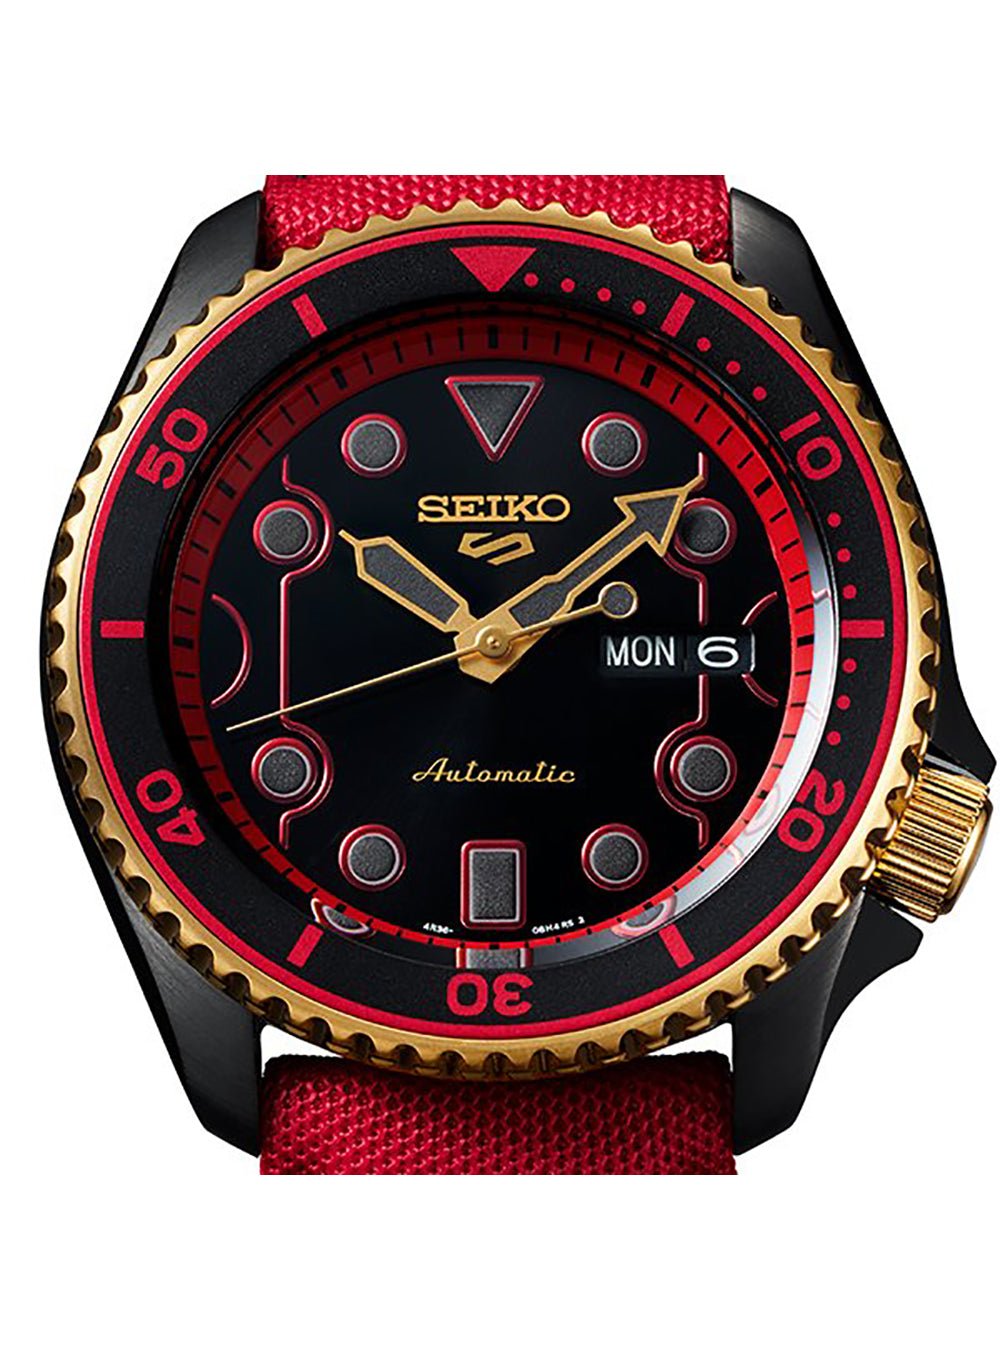 SEIKO 5 SPORTS STREET FIGHTER V LIMITED EDITION KEN MODEL SBSA080 MADE IN JAPAN JDMjapan-select4954628456717WRISTWATCHSEIKO